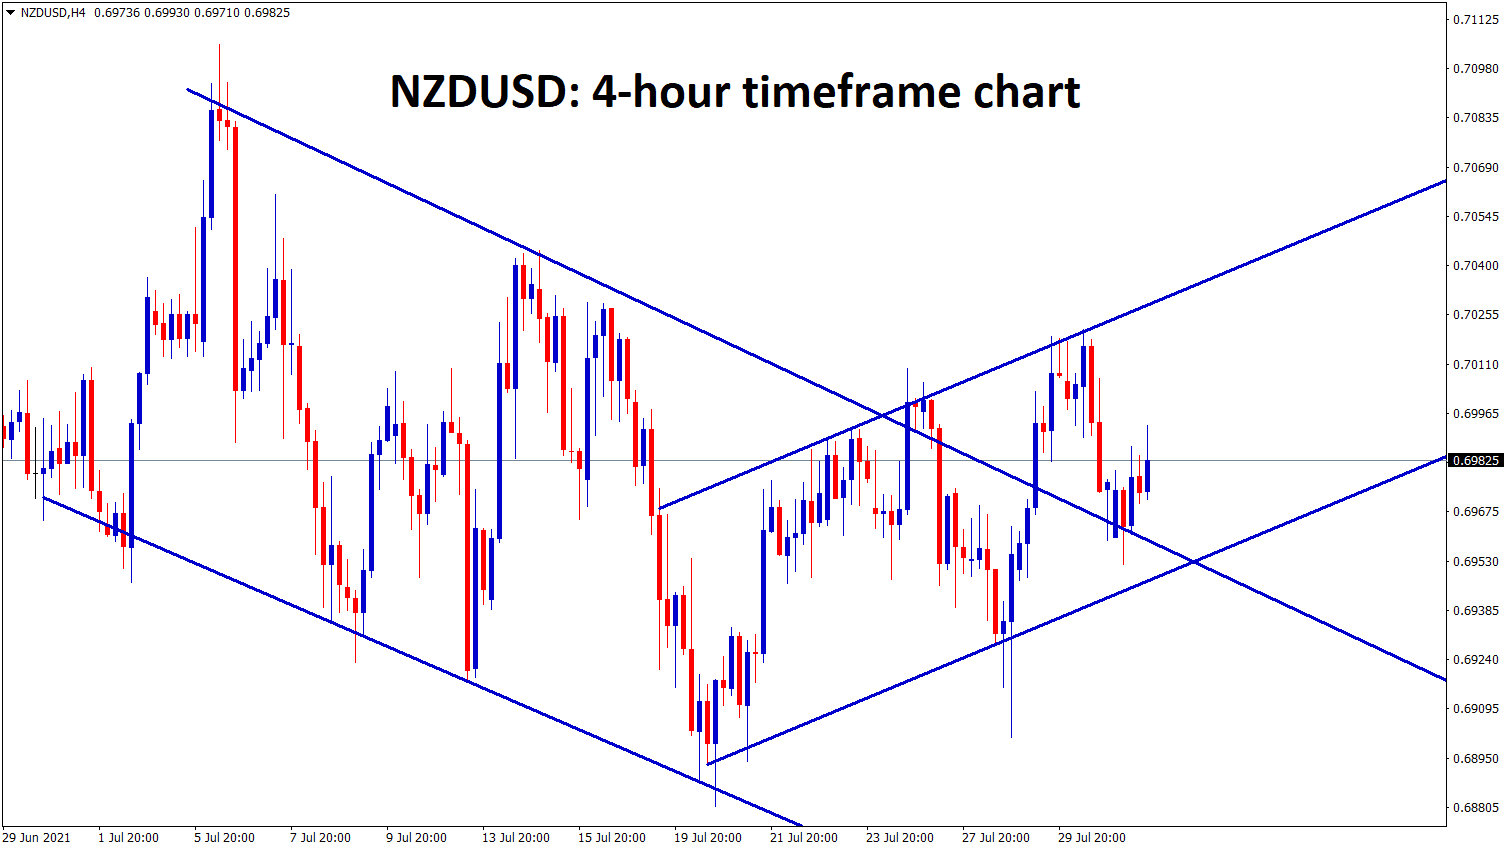 NZDUSD is moving up and down between the channel ranges